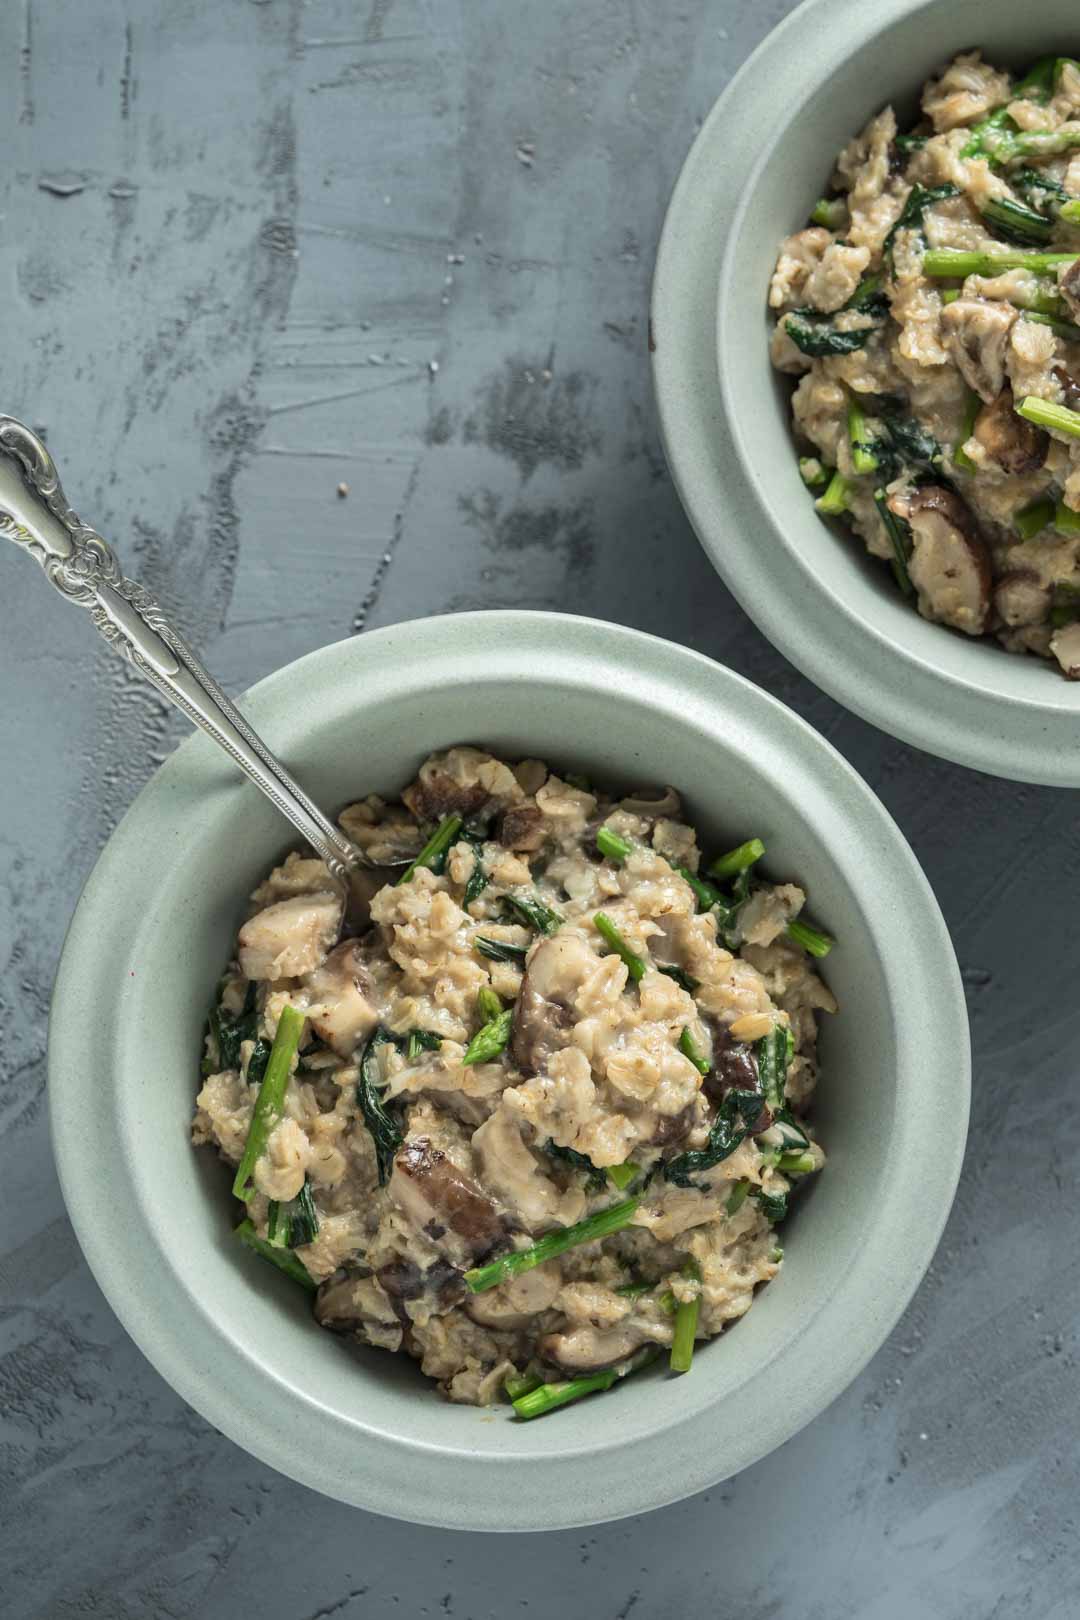 two bowls of savory oatmeal with vegetables